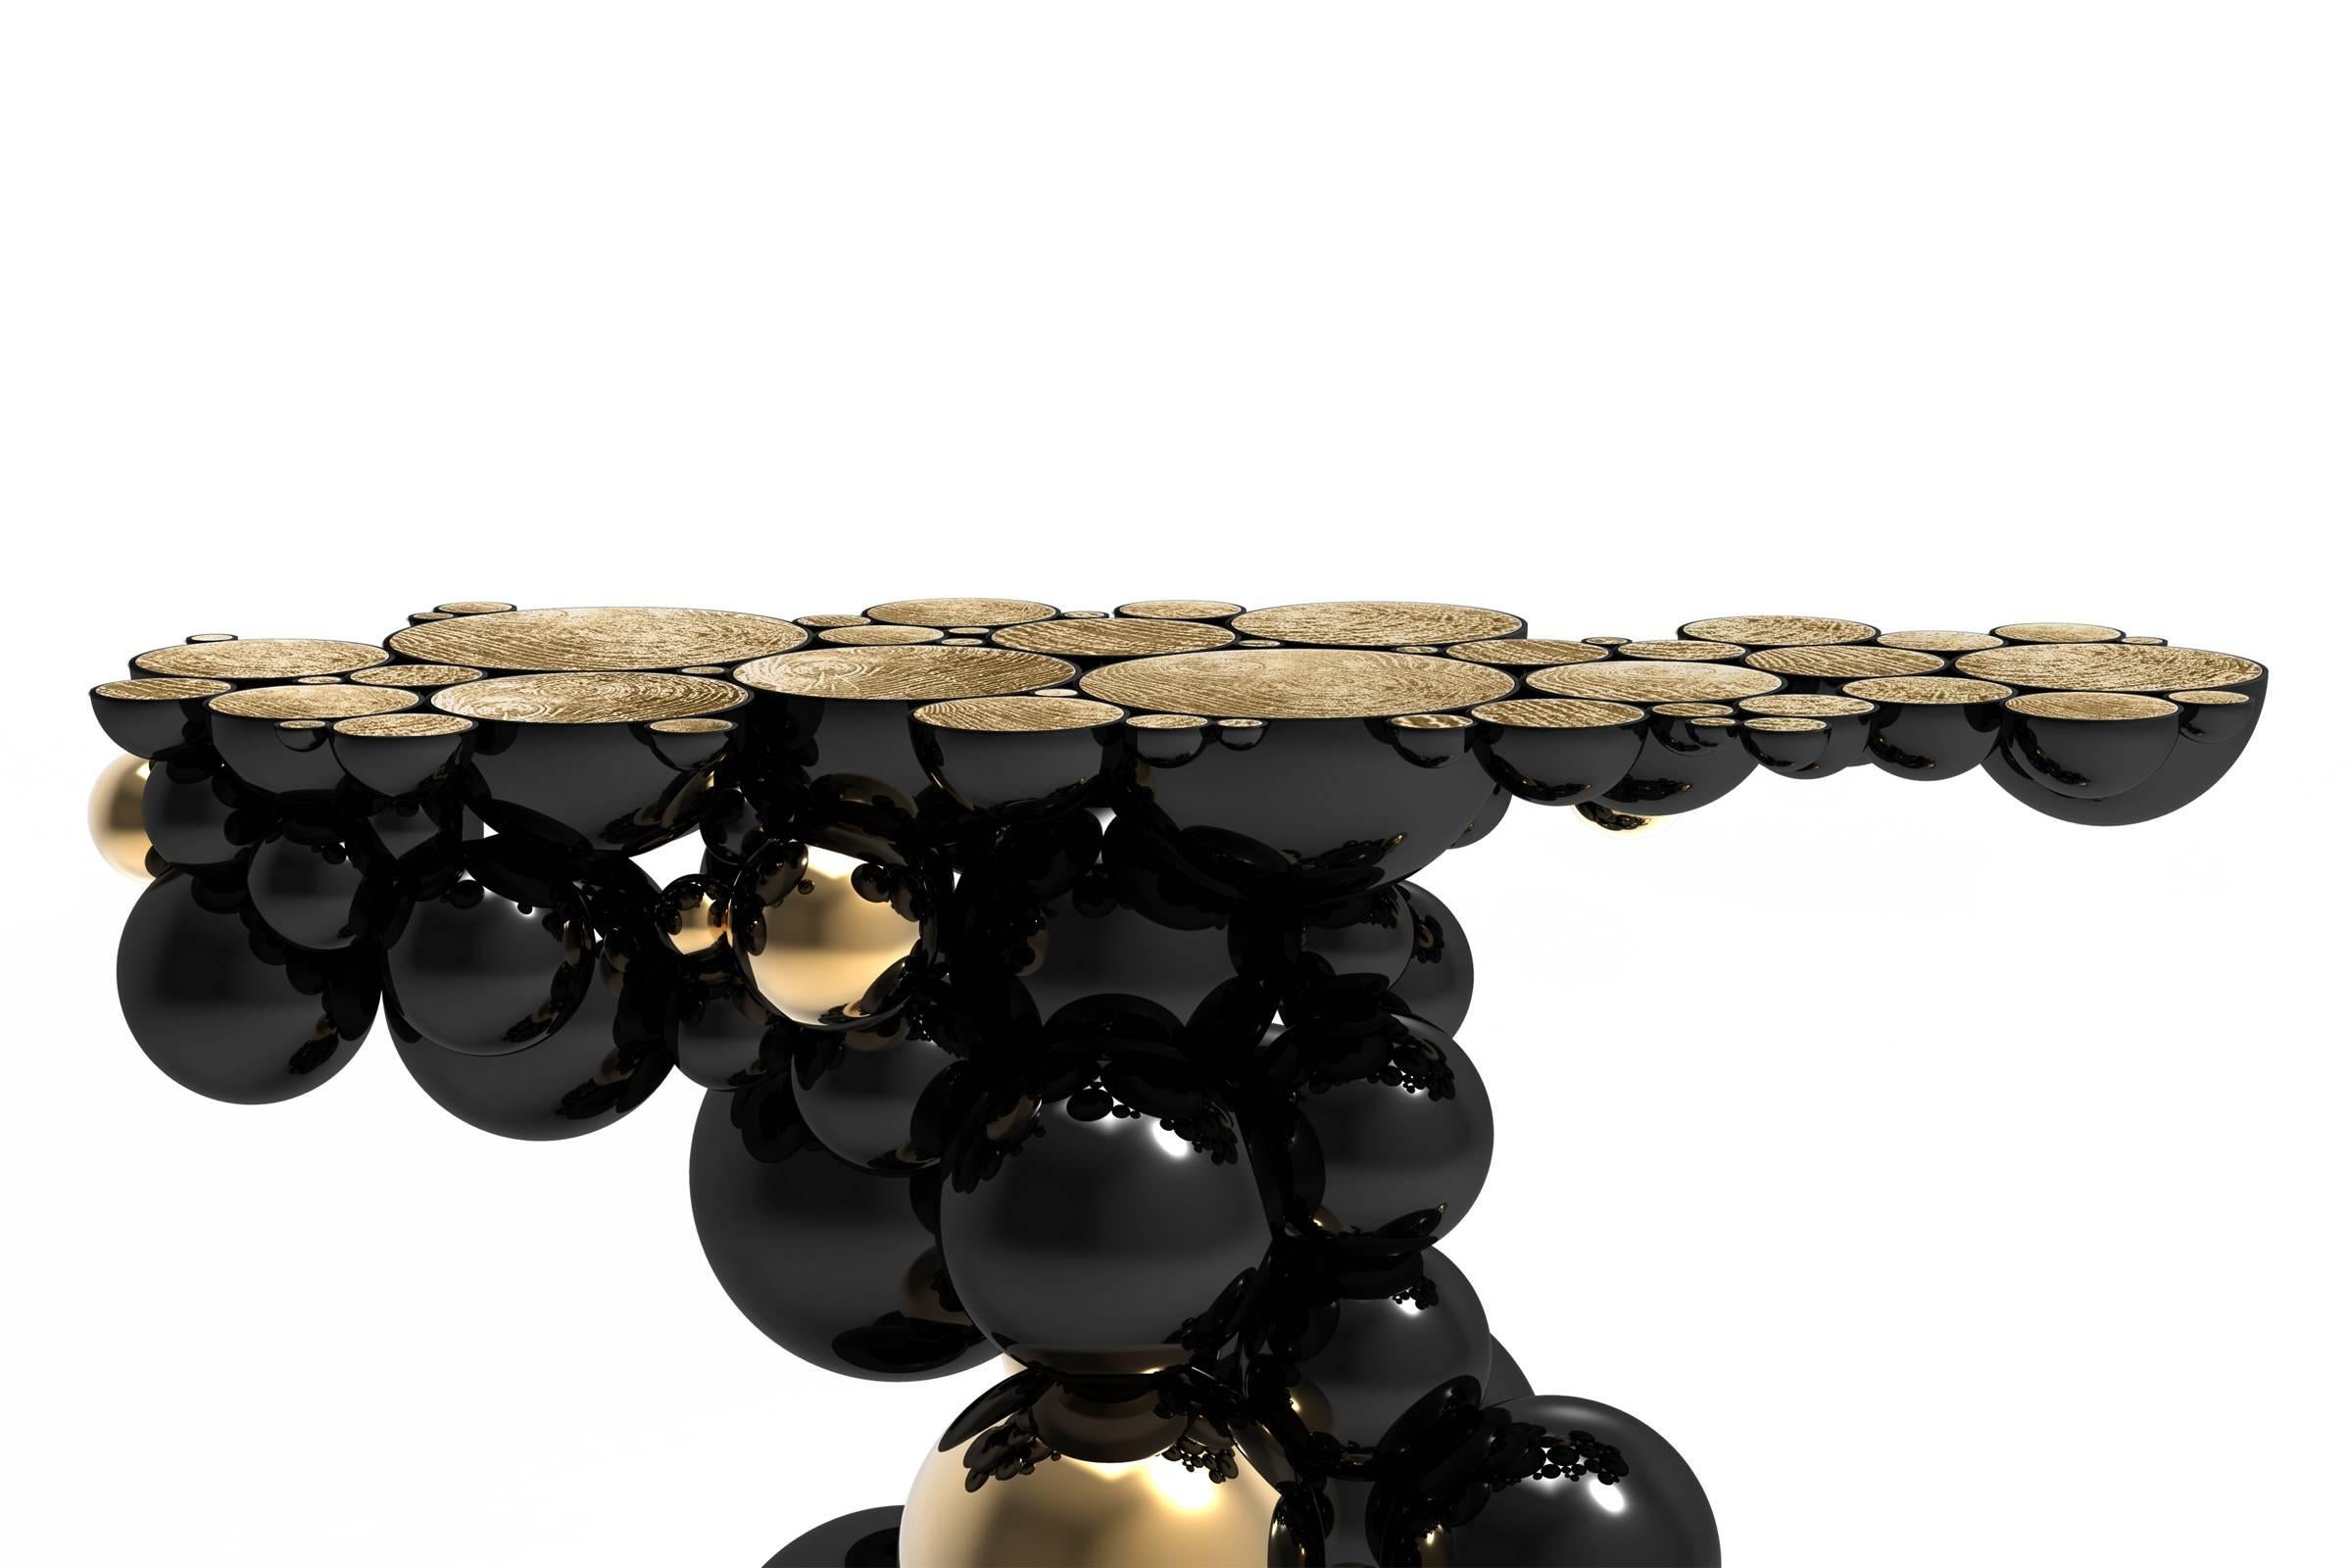 Console table spheres composed by metallic spheres 
and semi spheres joined together. Aluminium black and 
gold finish.
